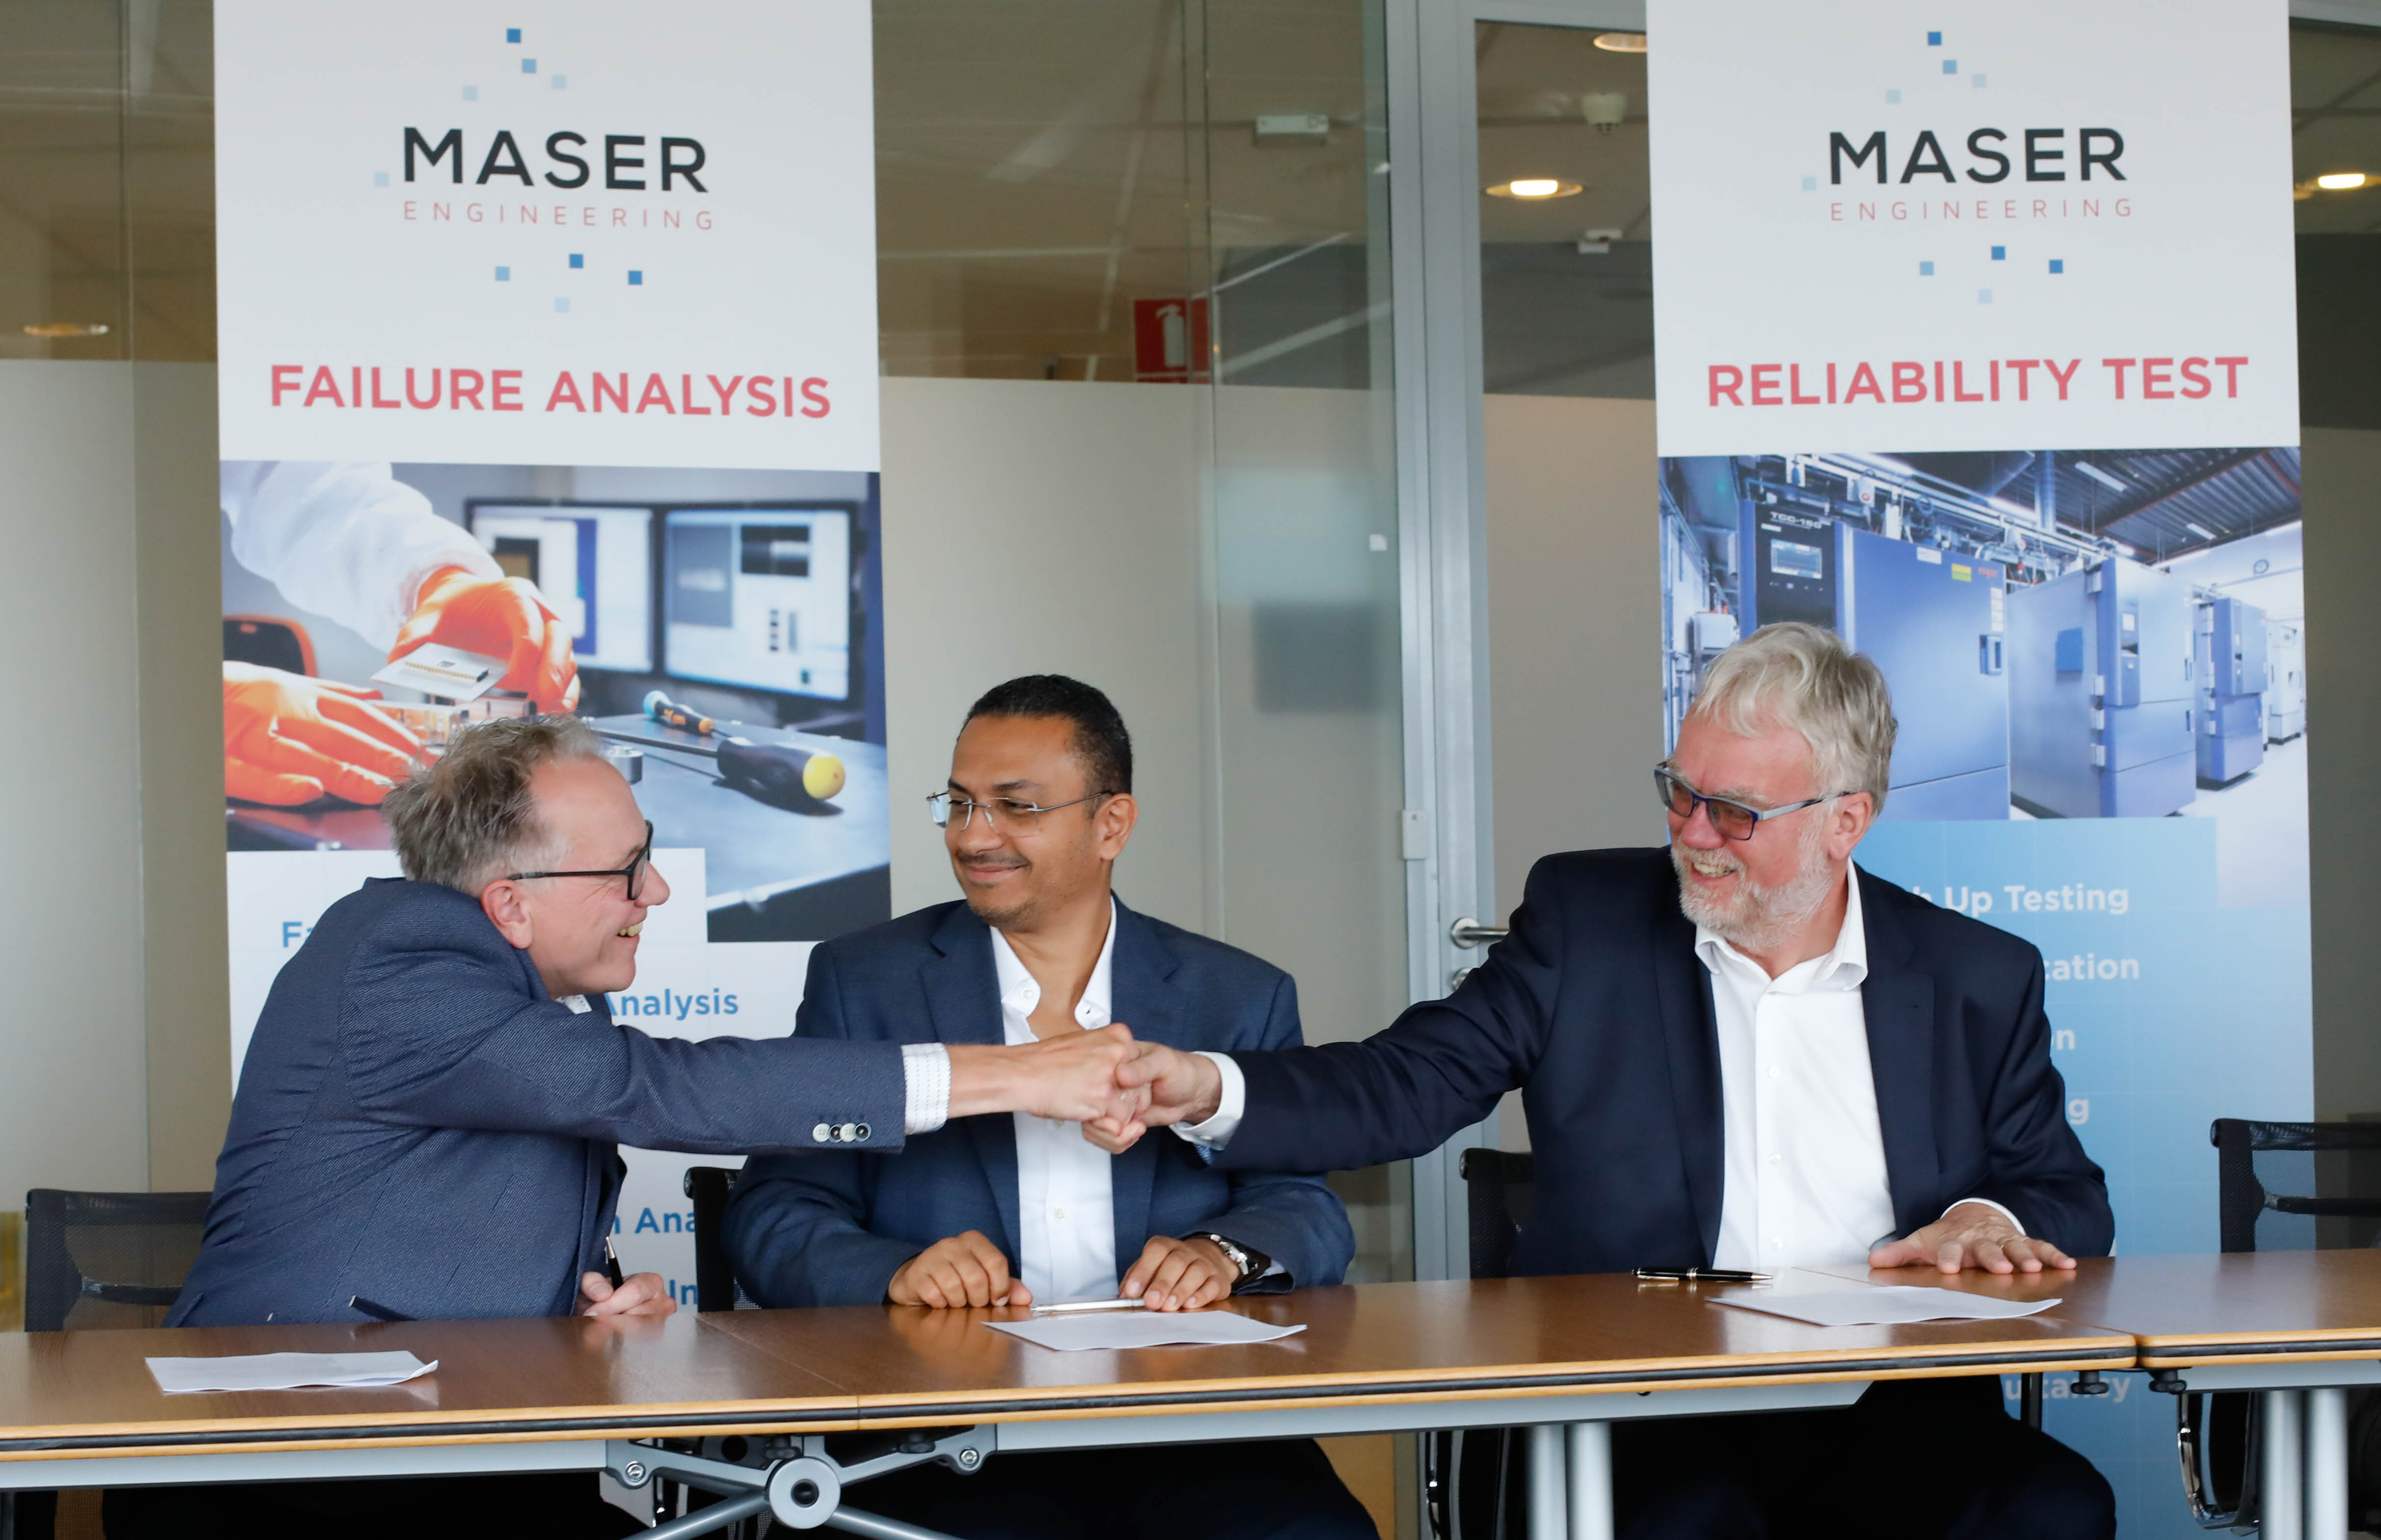 Takeover MASER Engineering by Eurofins and executive management